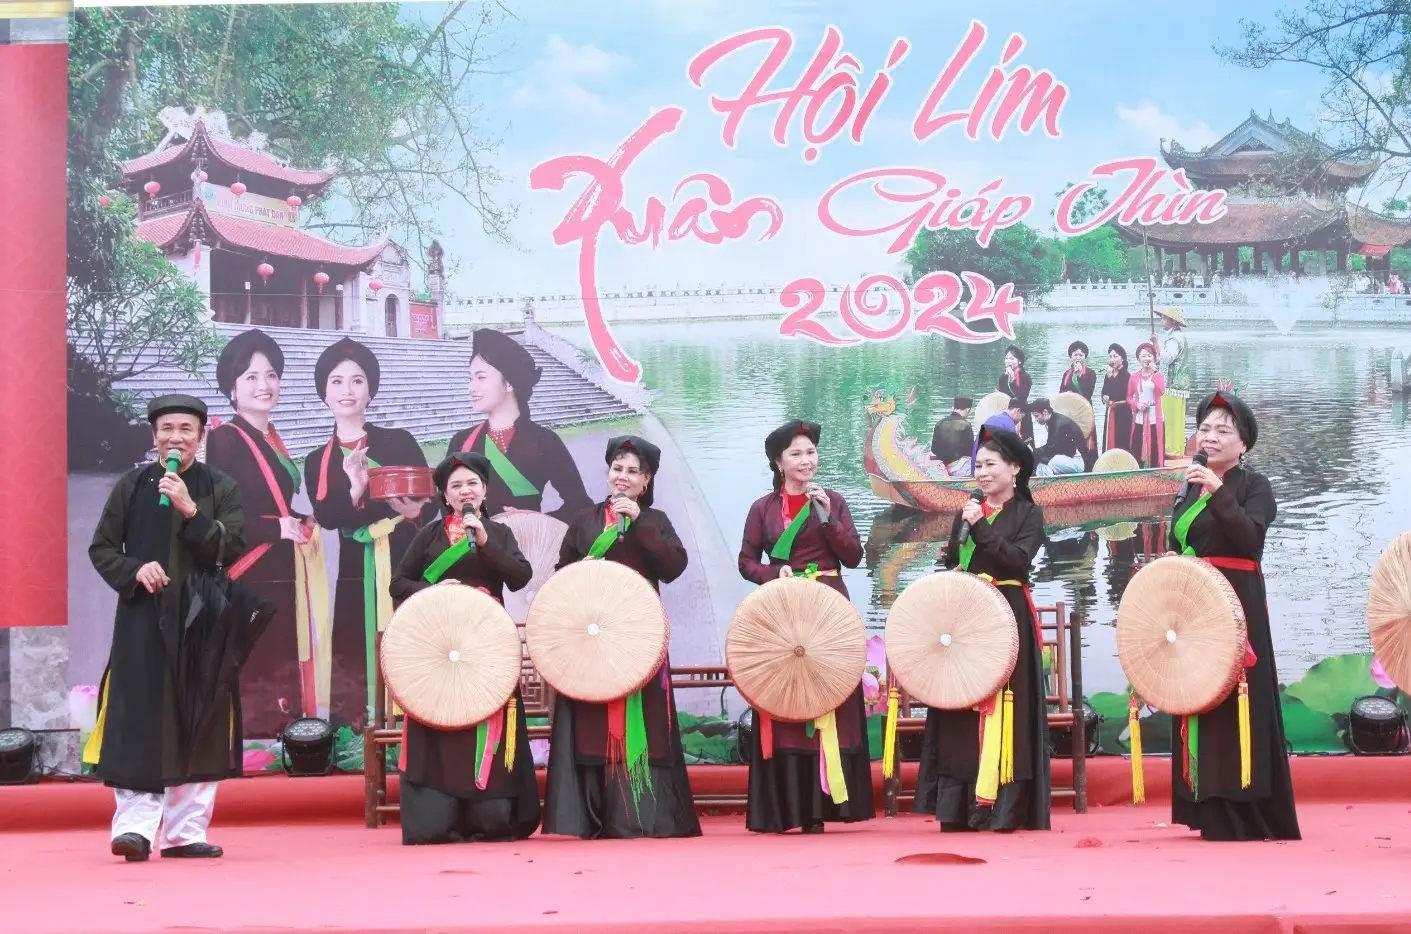 Lim Festival – The Most Famous Traditional Festival In Bac Ninh